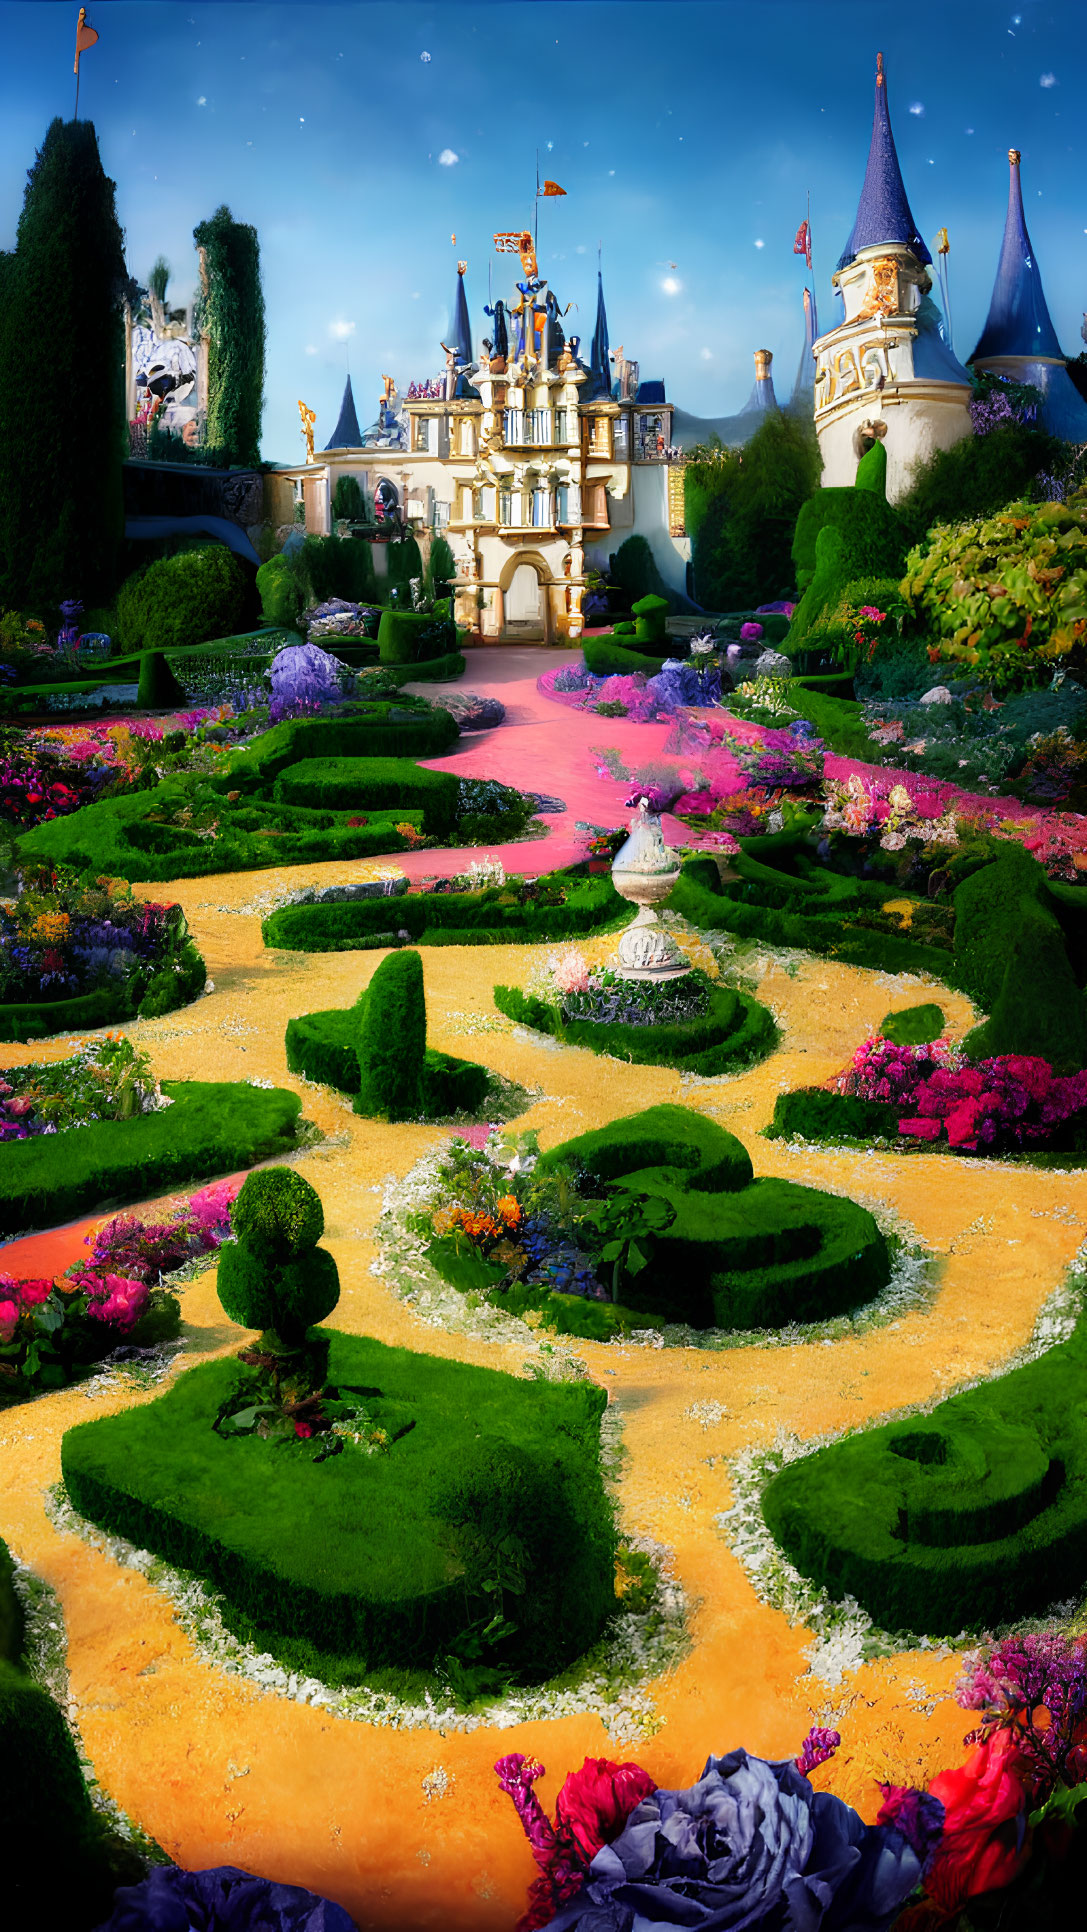 Colorful fairytale castle with manicured gardens and pink pathway